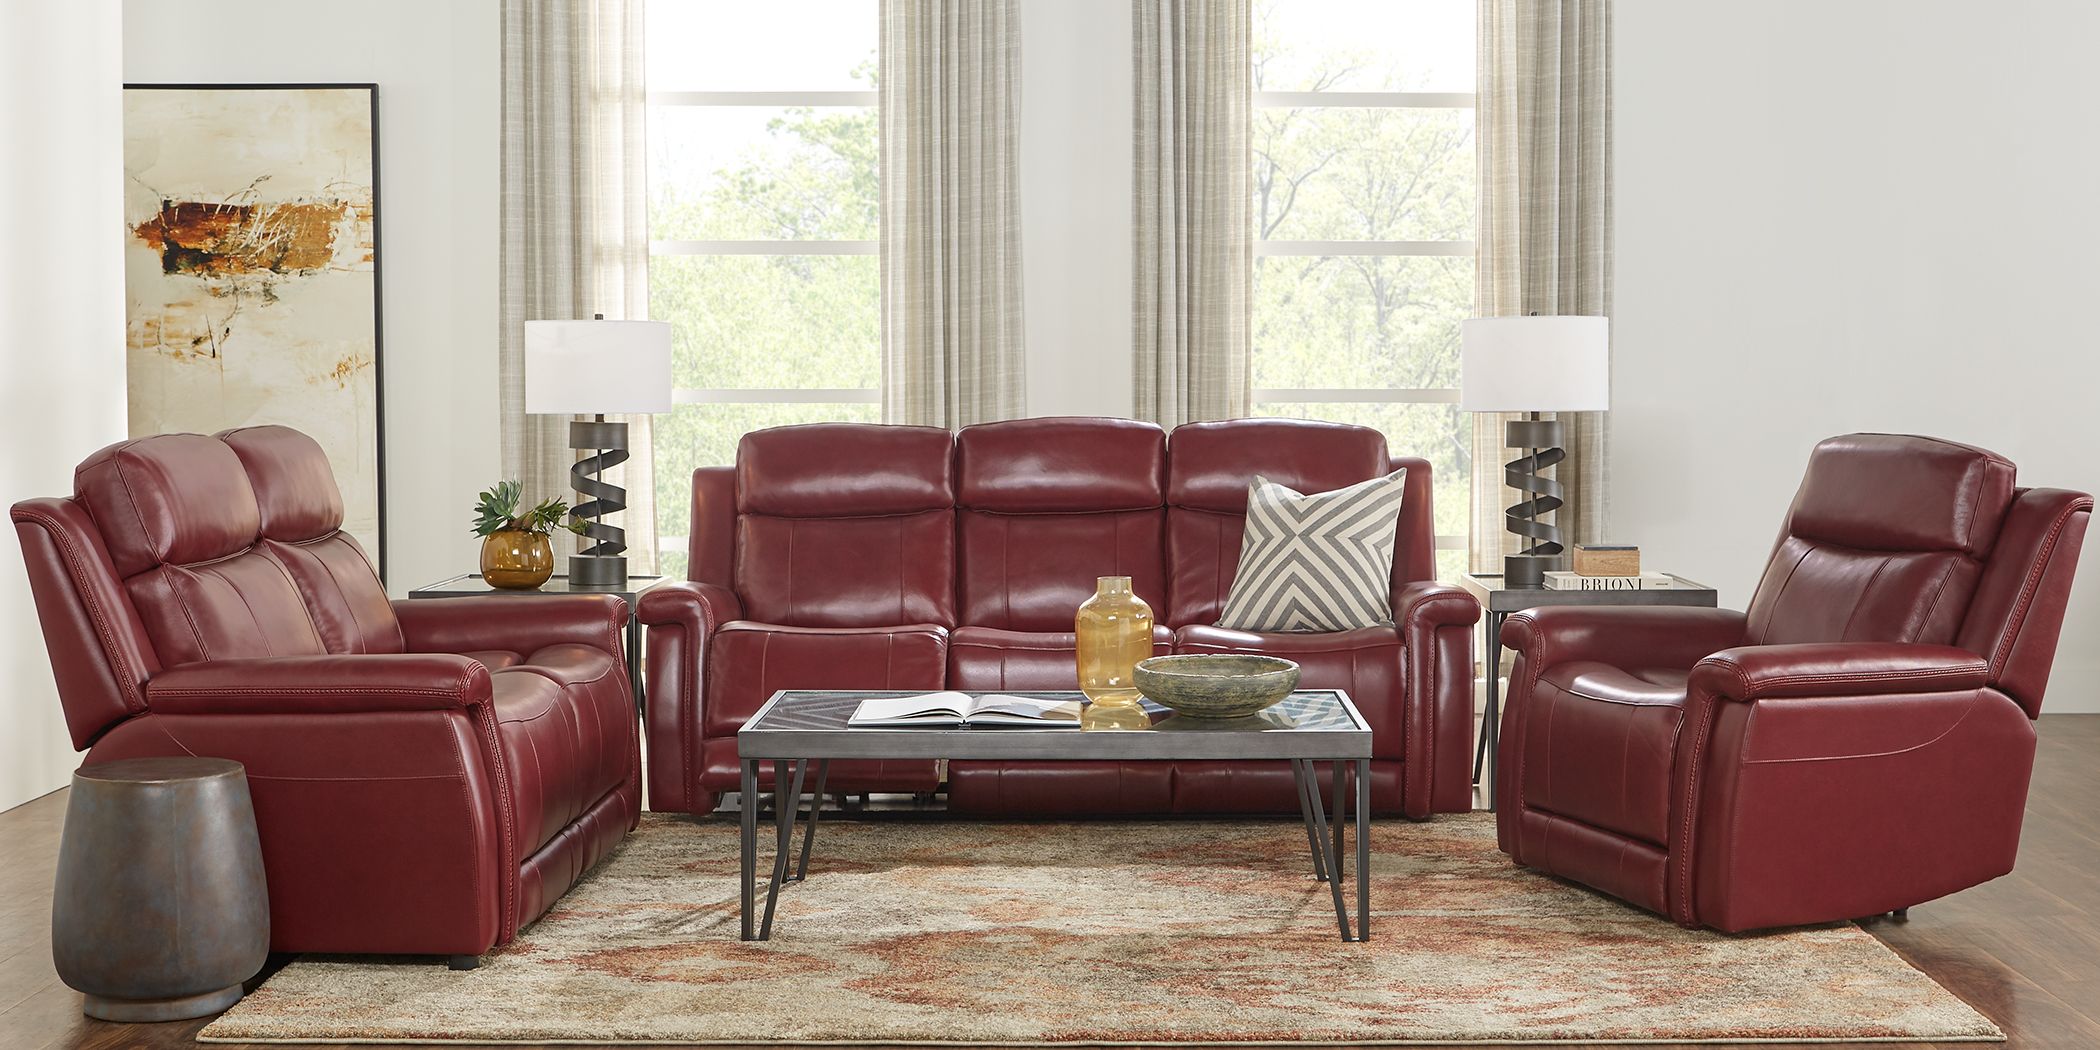 Red Leather Living Room Sets Sofas, Red Leather Couch And Chair Set